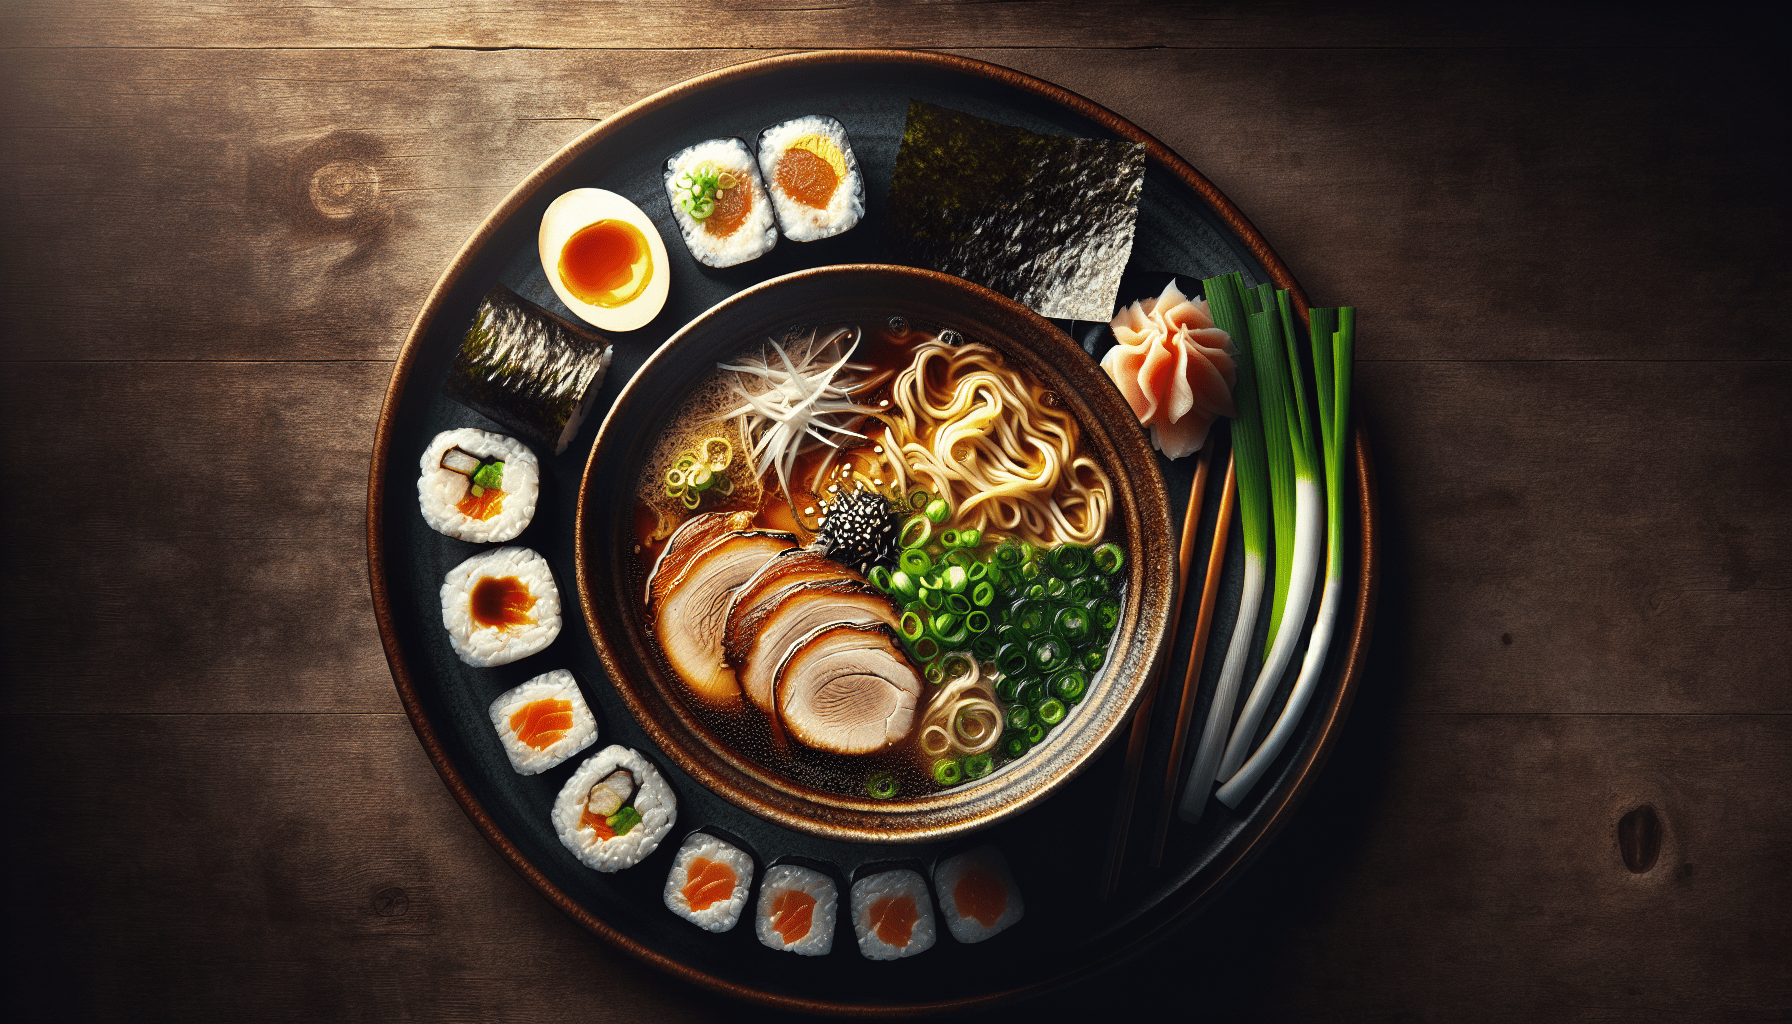 What’s Your Favorite Japanese Recipe That’s Perfect For A Quick Lunch?